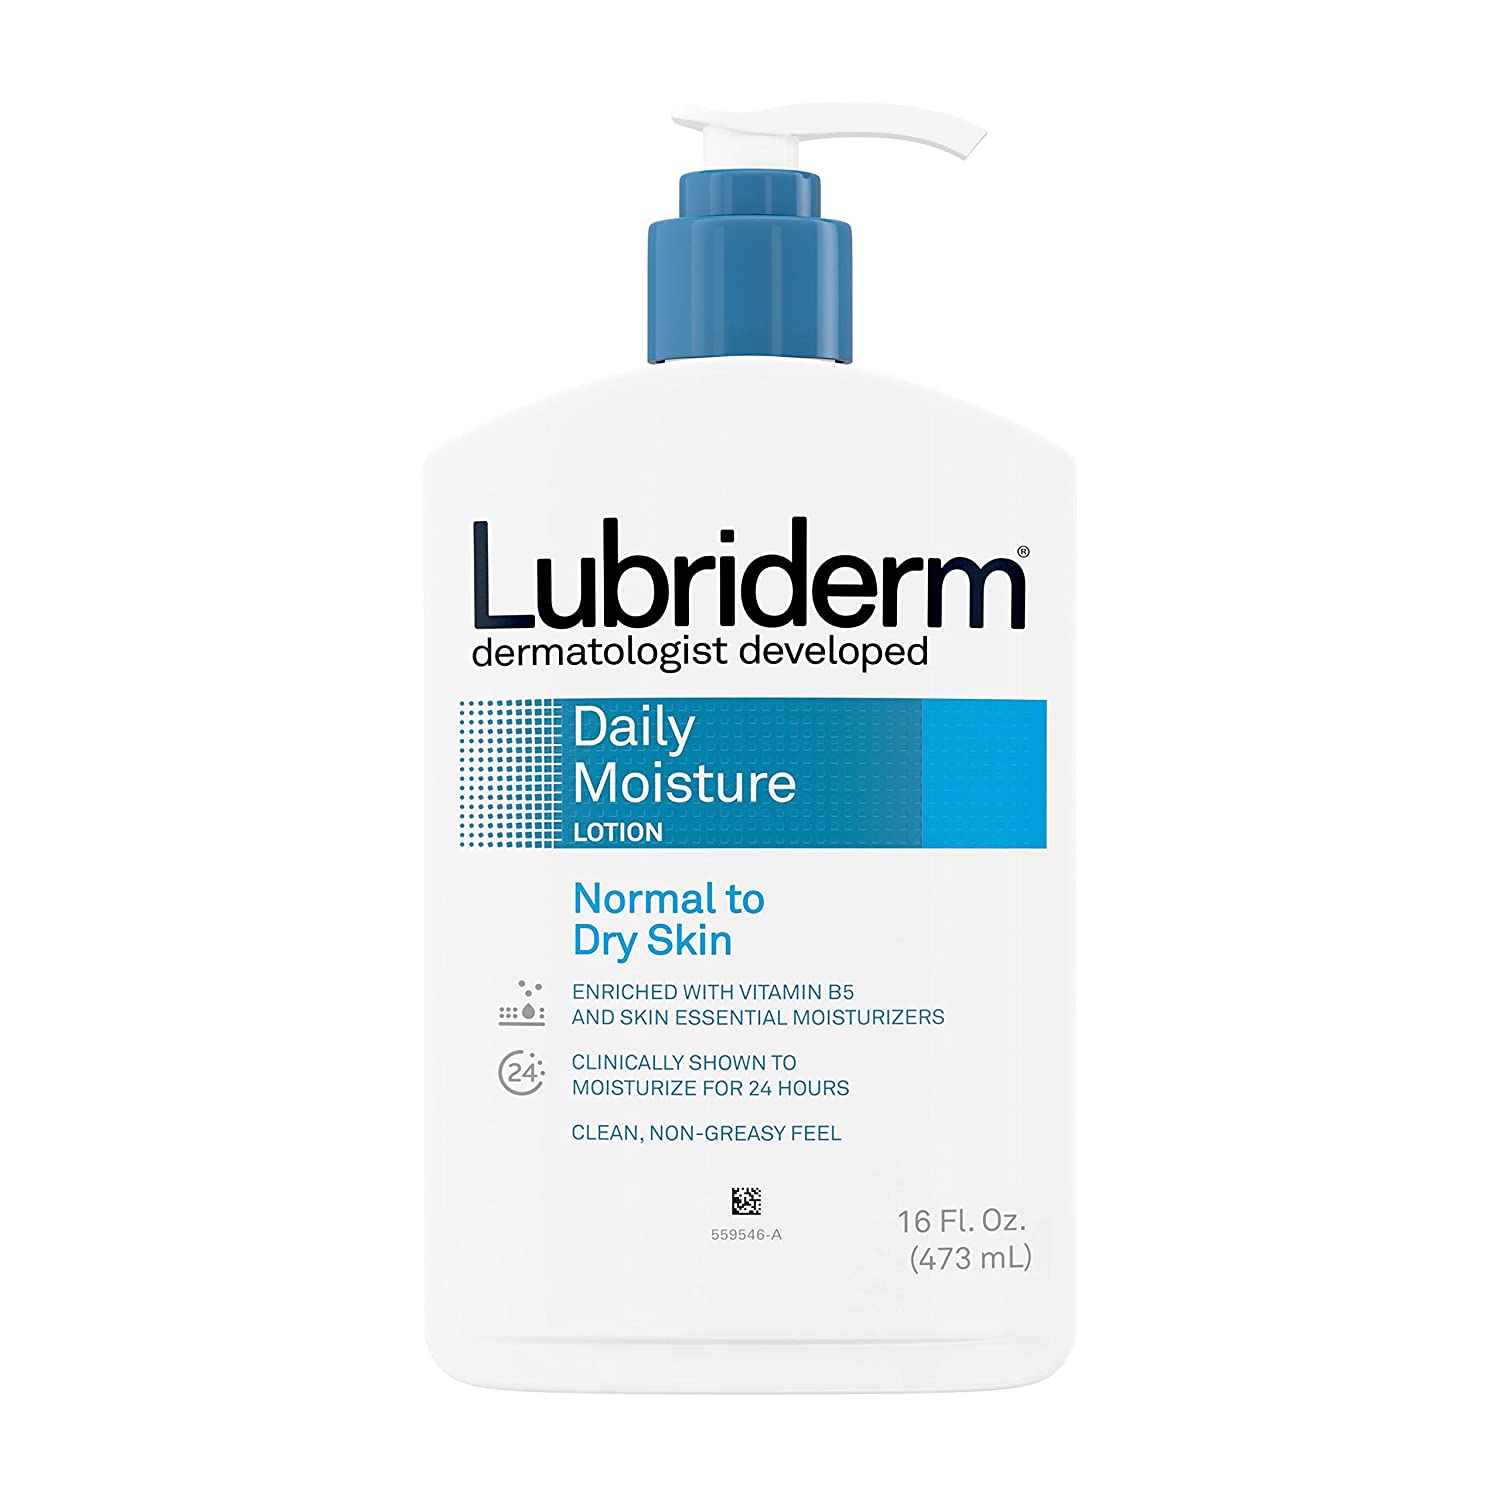 ''Lubriderm Daily Moisture Hydrating Body and Hand LOTION To Help Moisturize Dry Skin with Pro-Vitami